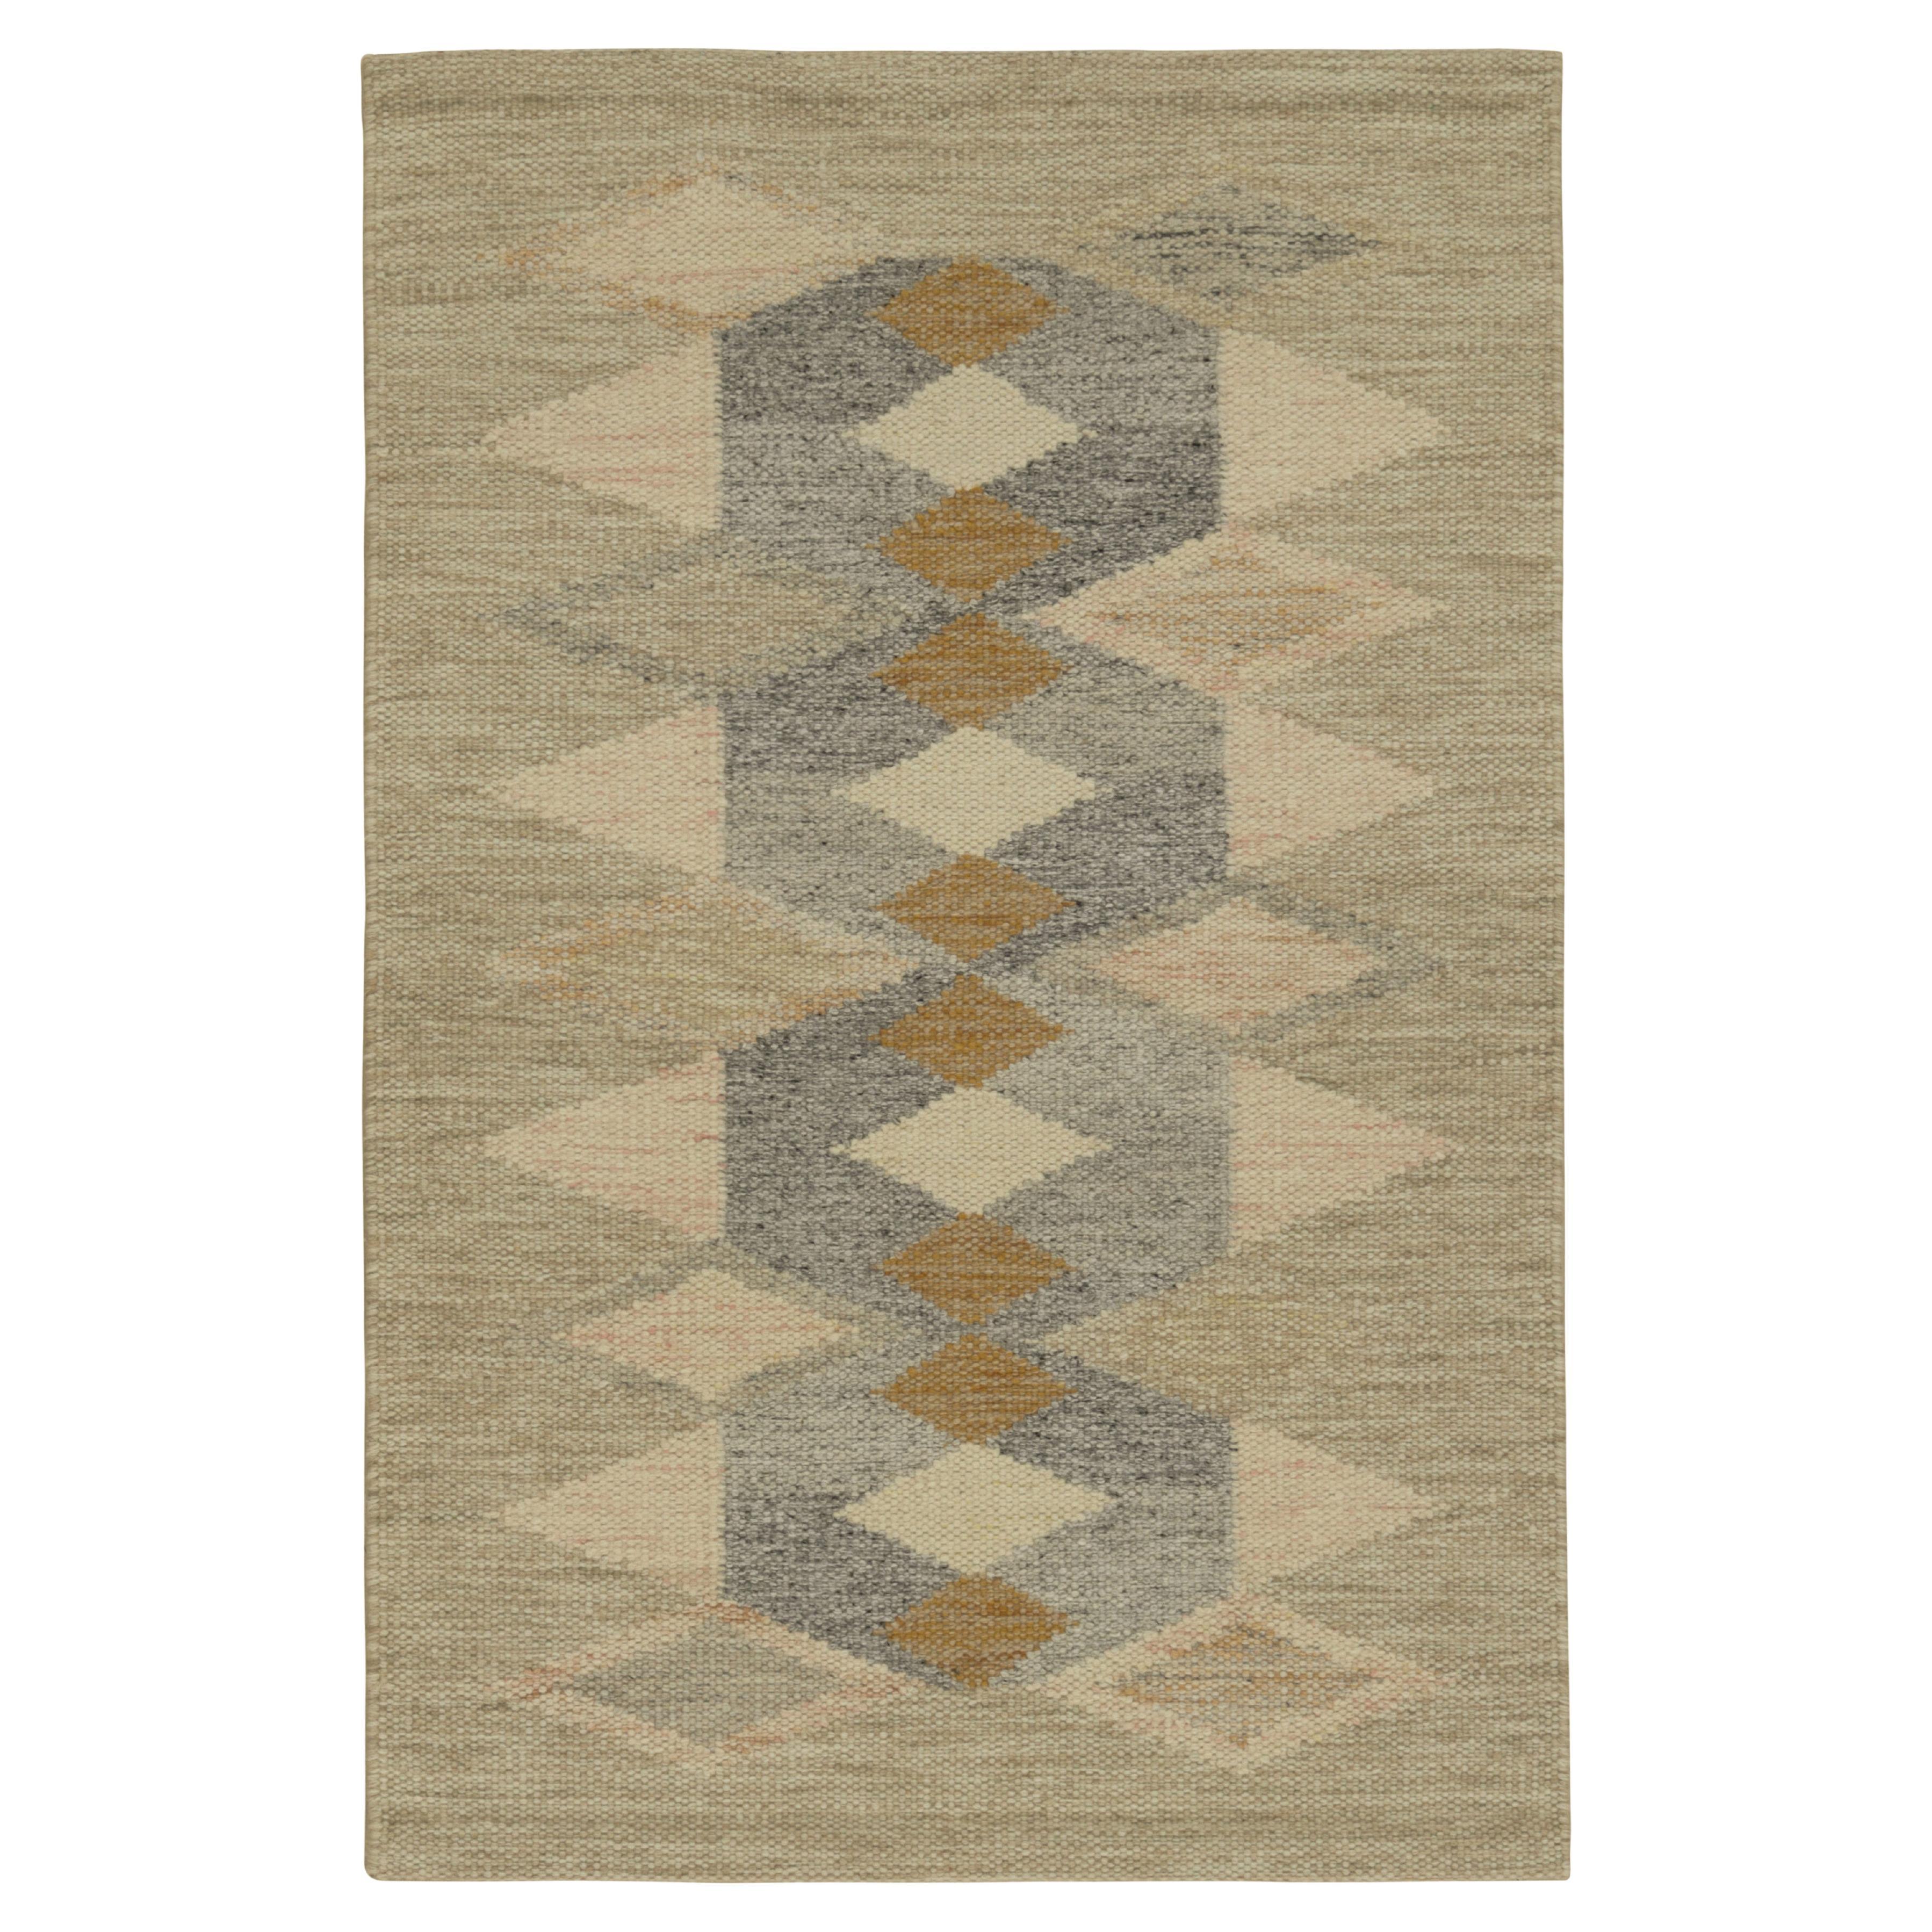 Rug & Kilim’s Scandinavian Style Rug in Beige and Gray, with Geometric Patterns